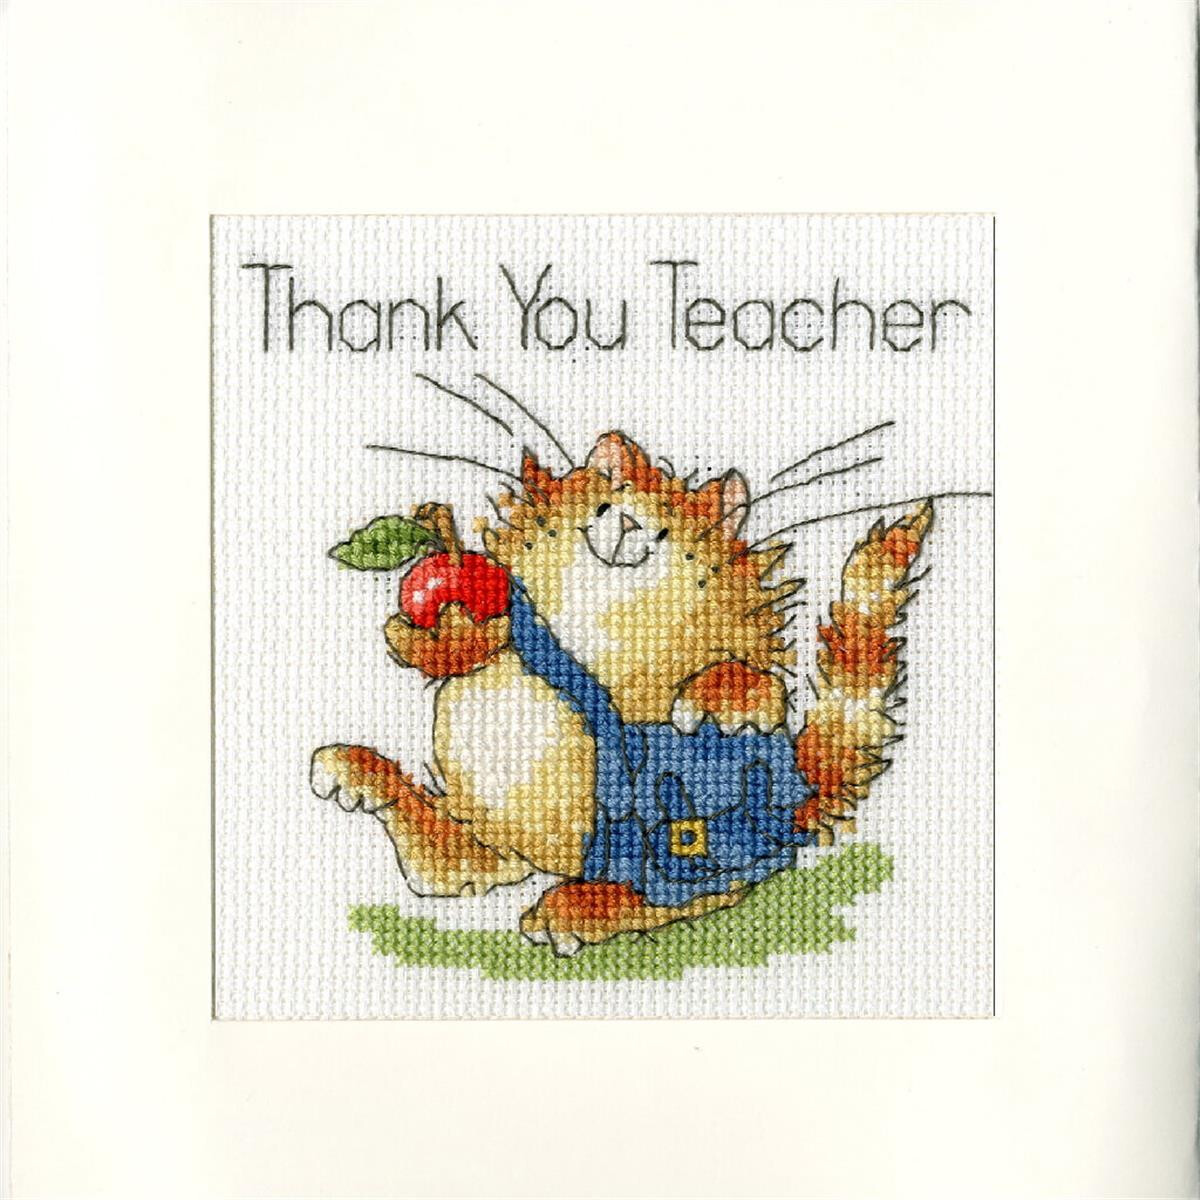 A cross stitch pattern (embroidery picture) of an orange...